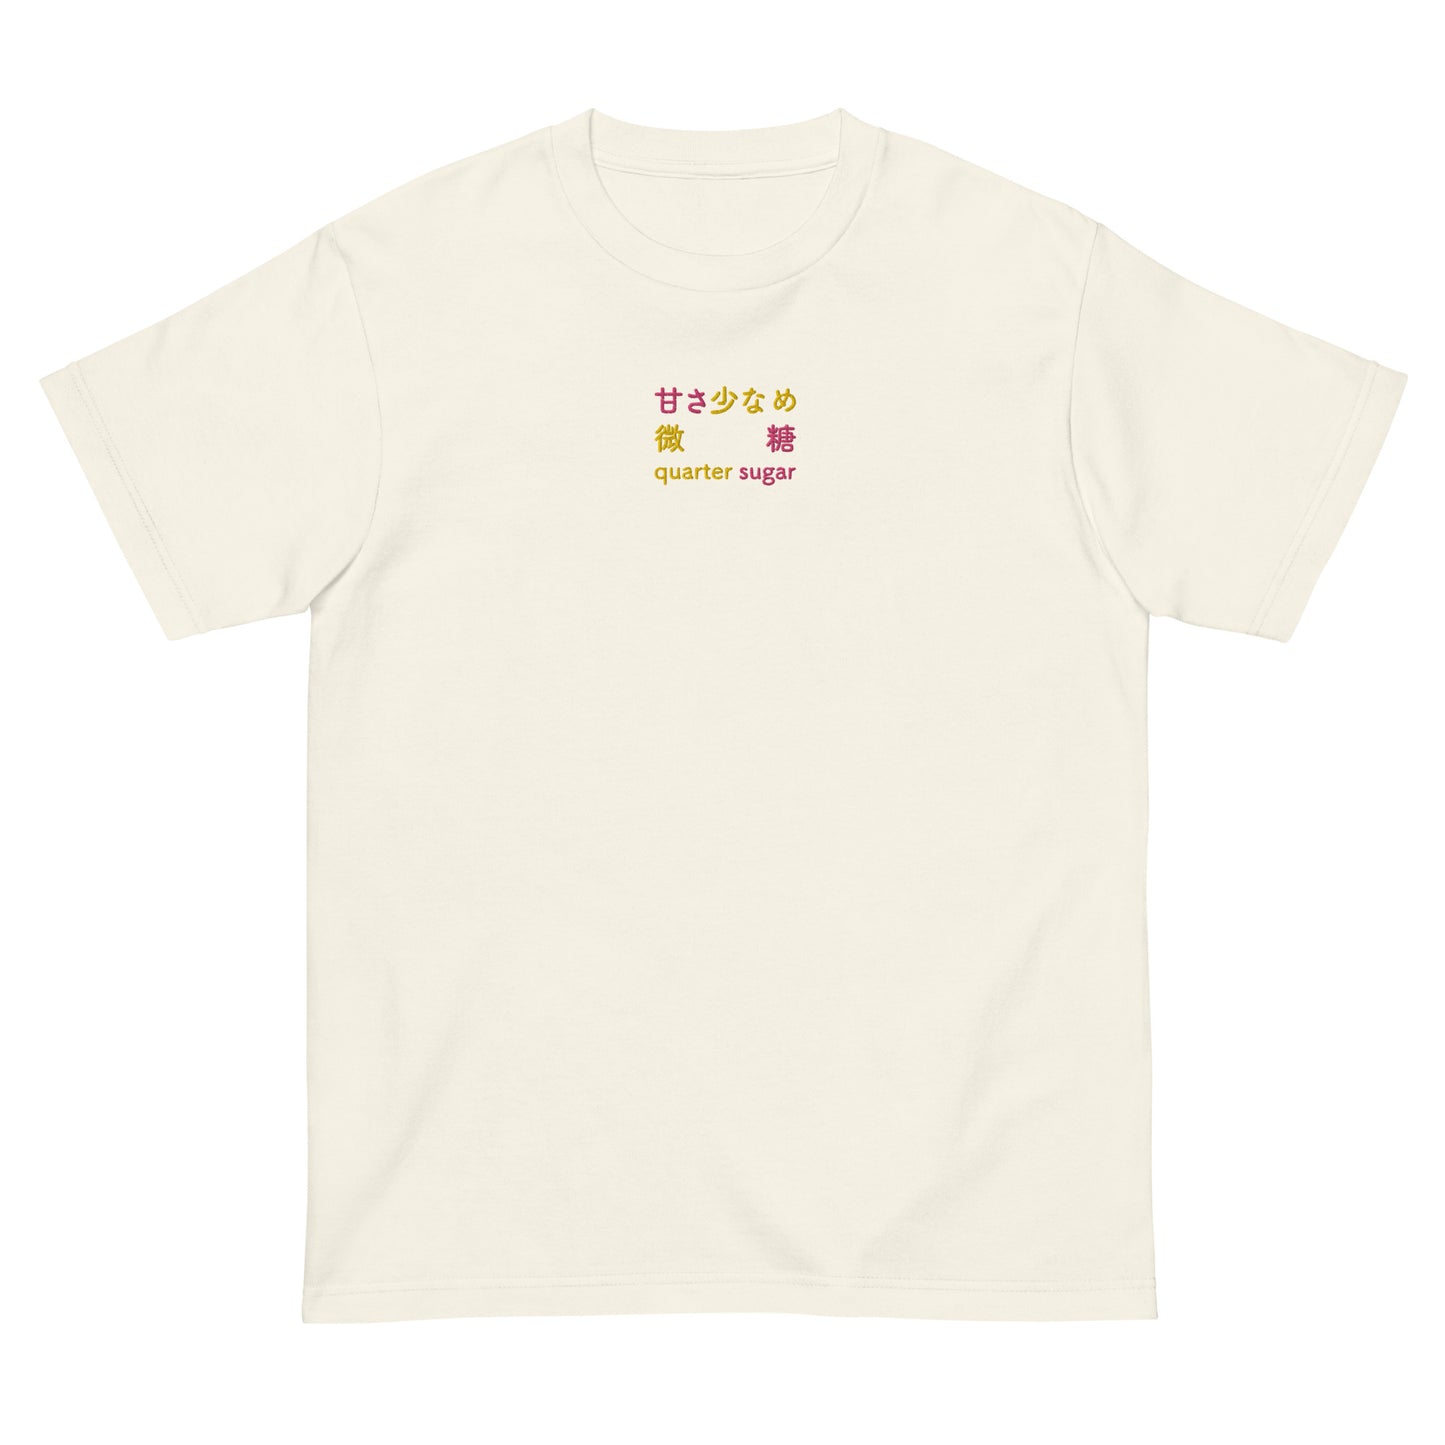 Ivory High Quality Tee - Front Design with an Yellow, Pink Embroidery "Quarter Sugar" in Japanese,Chinese and English